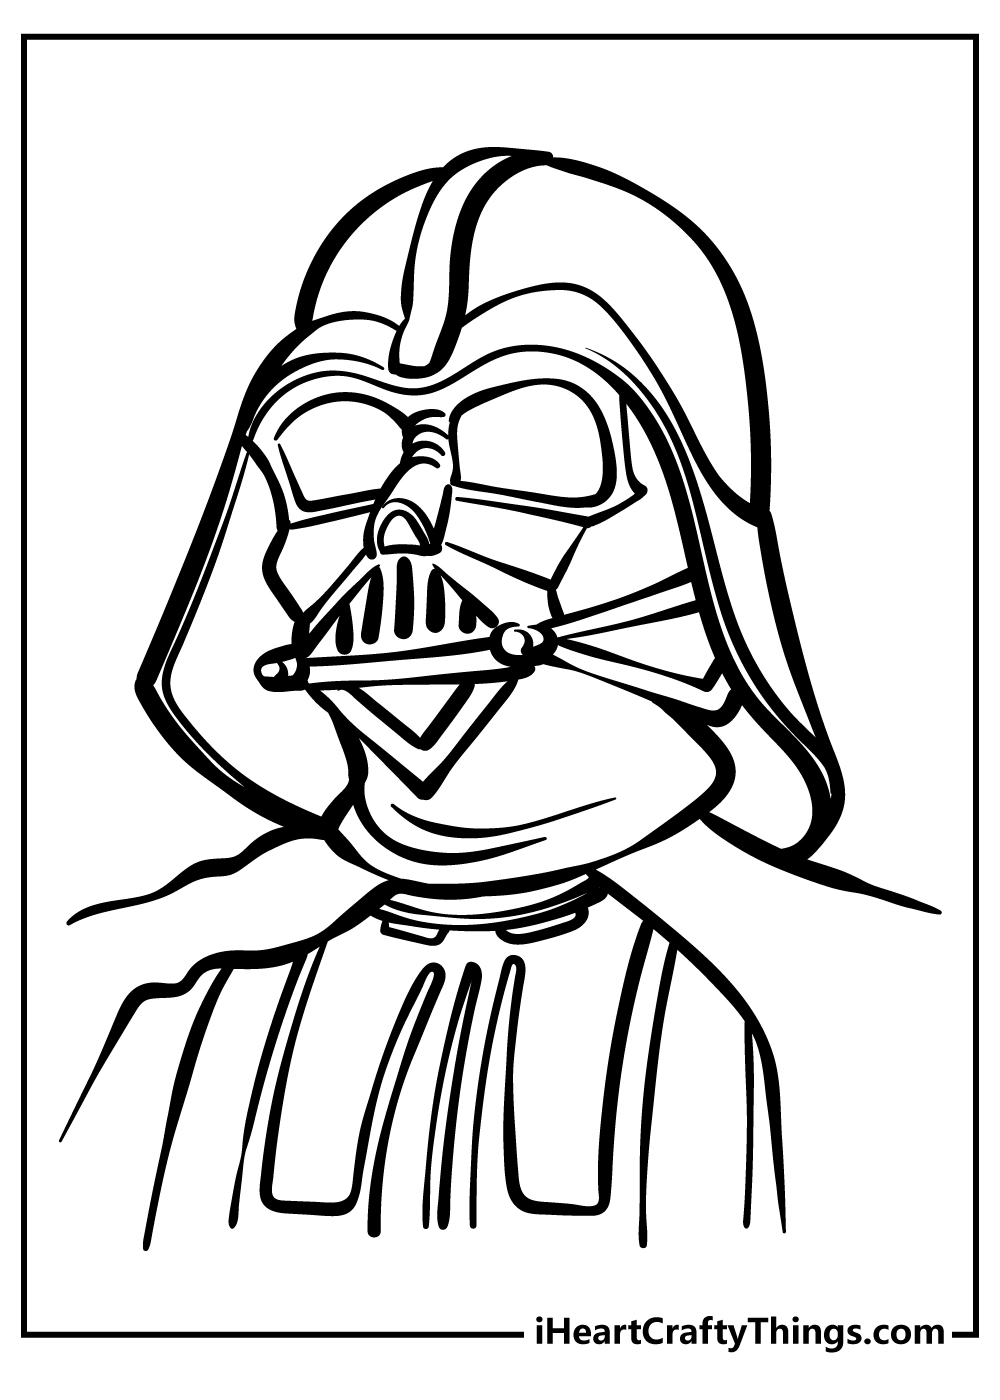 Star Wars Coloring Pages for adults free printable